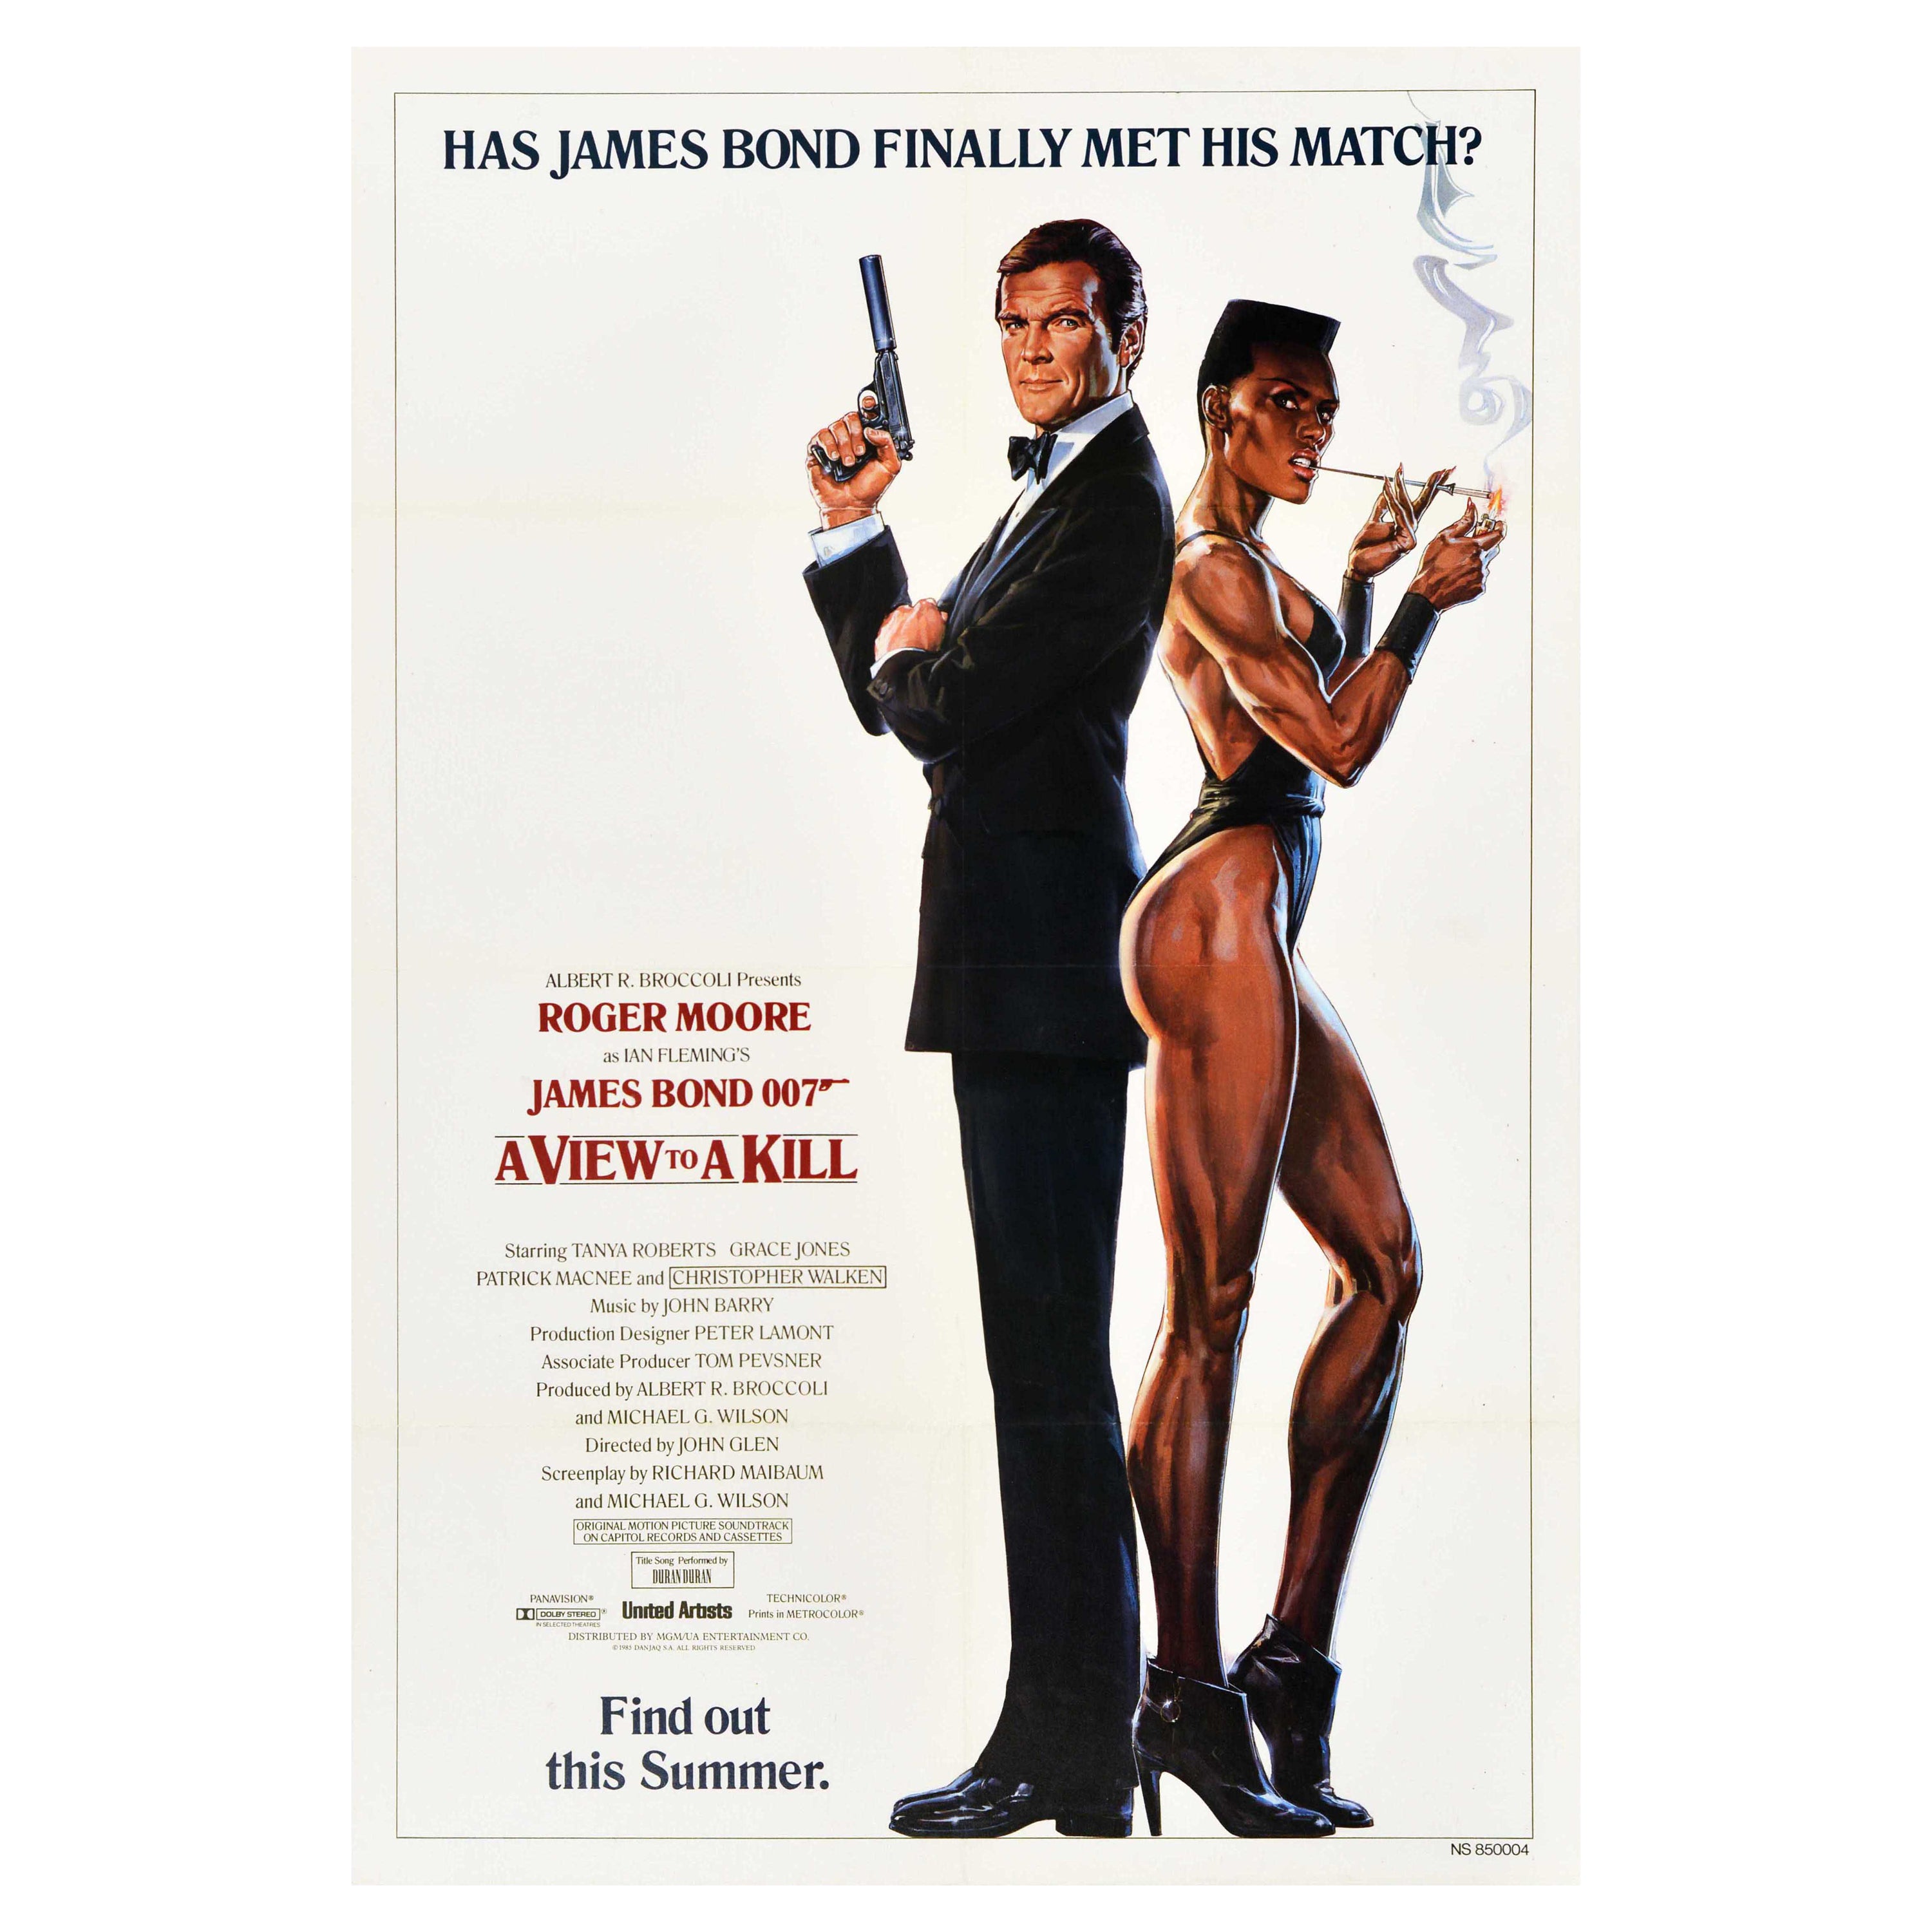 Original Vintage Film Poster James Bond A View To A Kill 007 Roger Moore Goozee im Angebot